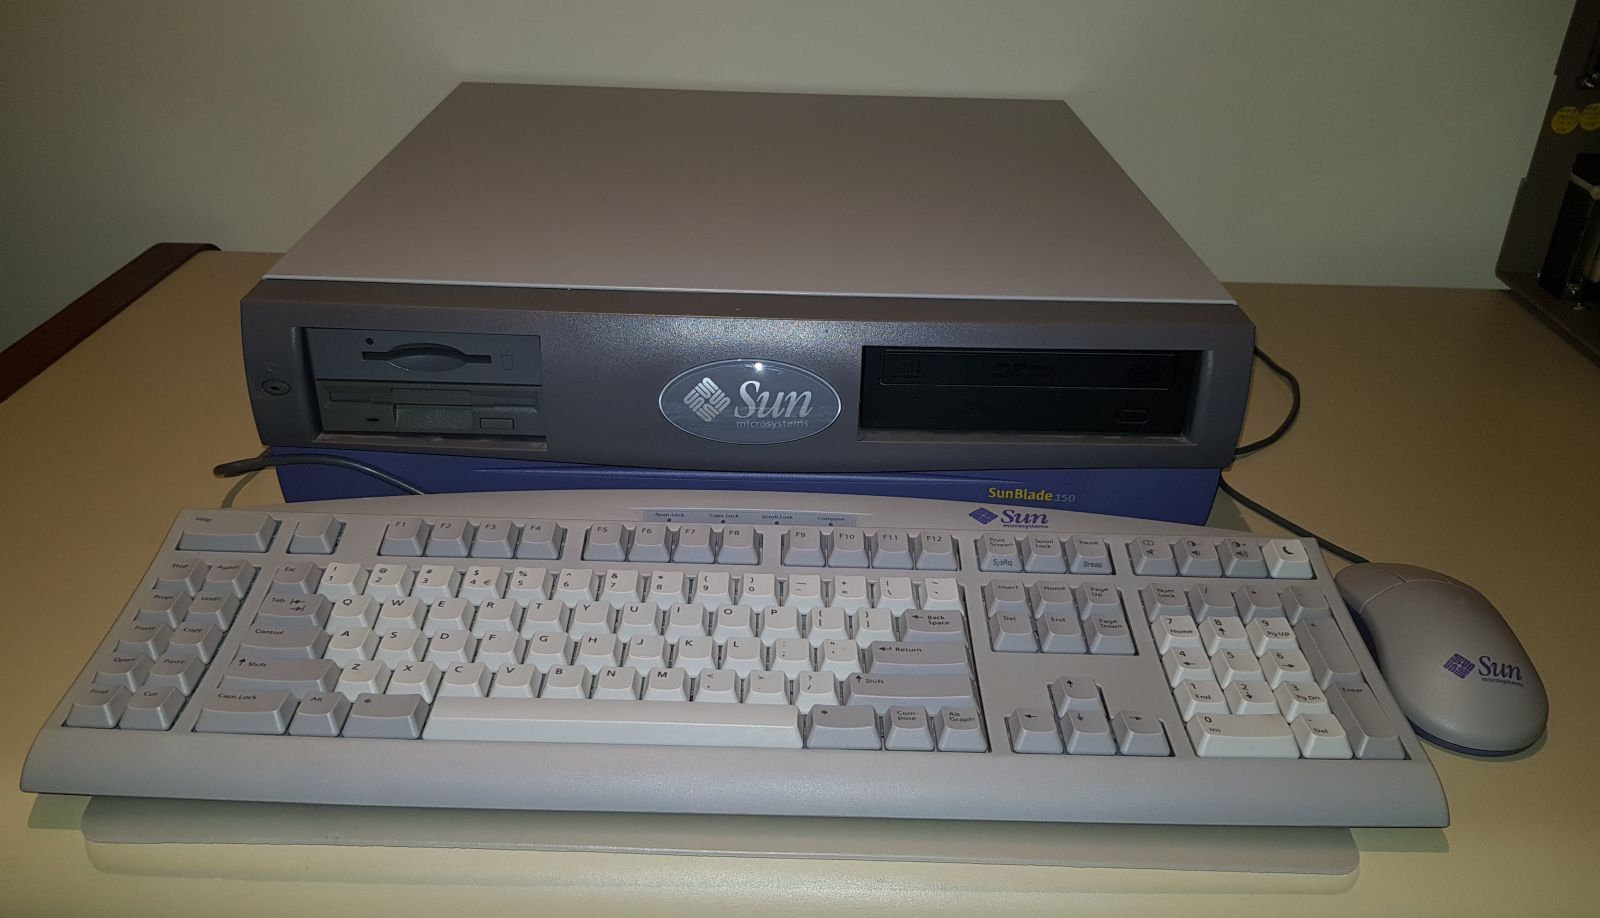 Sun Blade 150 Workstation with 2Gb Memory, Keyboard and Mouse